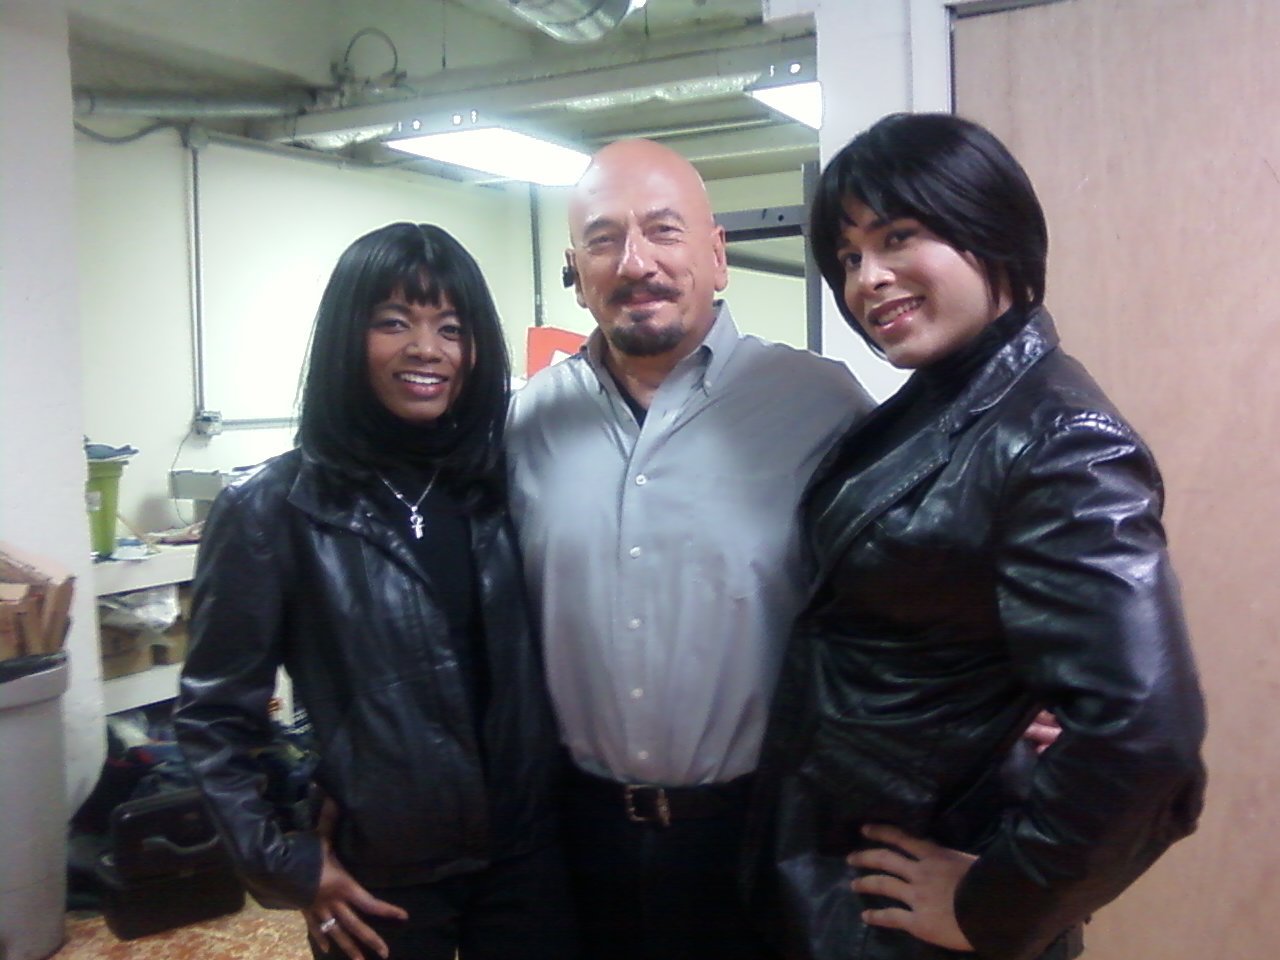 Carla Renee, Tom Lyle, Nyla Rose on the set of Signals 2